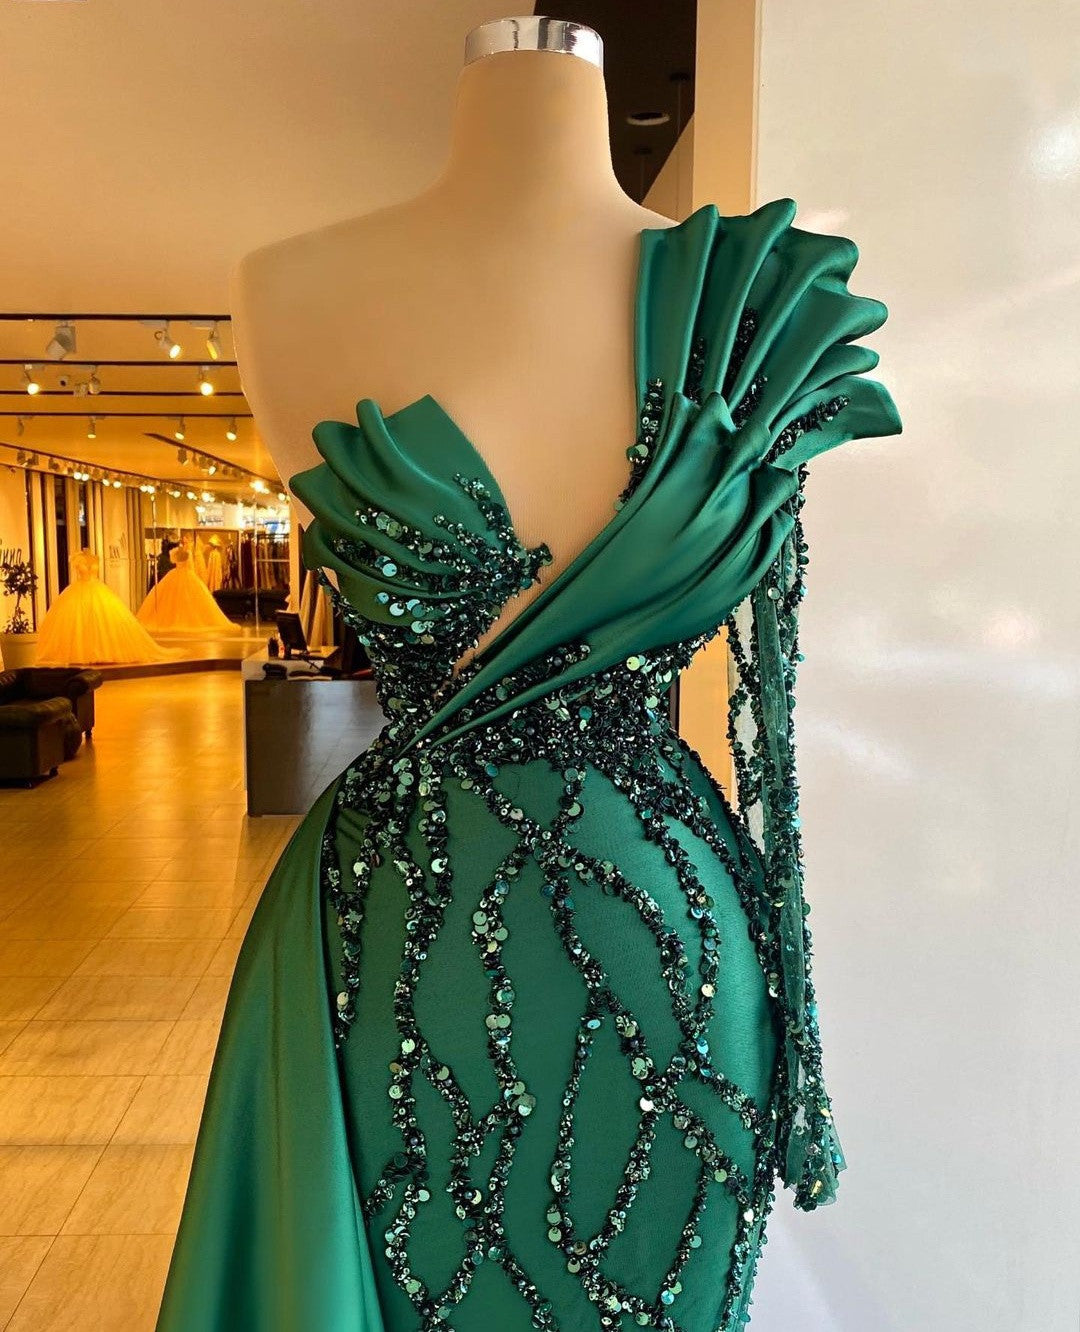 Crystal Mermaid Tiered Prom Dress With Tiered Ruffles And Full Sleeves  Elegant V Neck Evening Gown For Formal Parties From Manweisi, $272.94 |  DHgate.Com